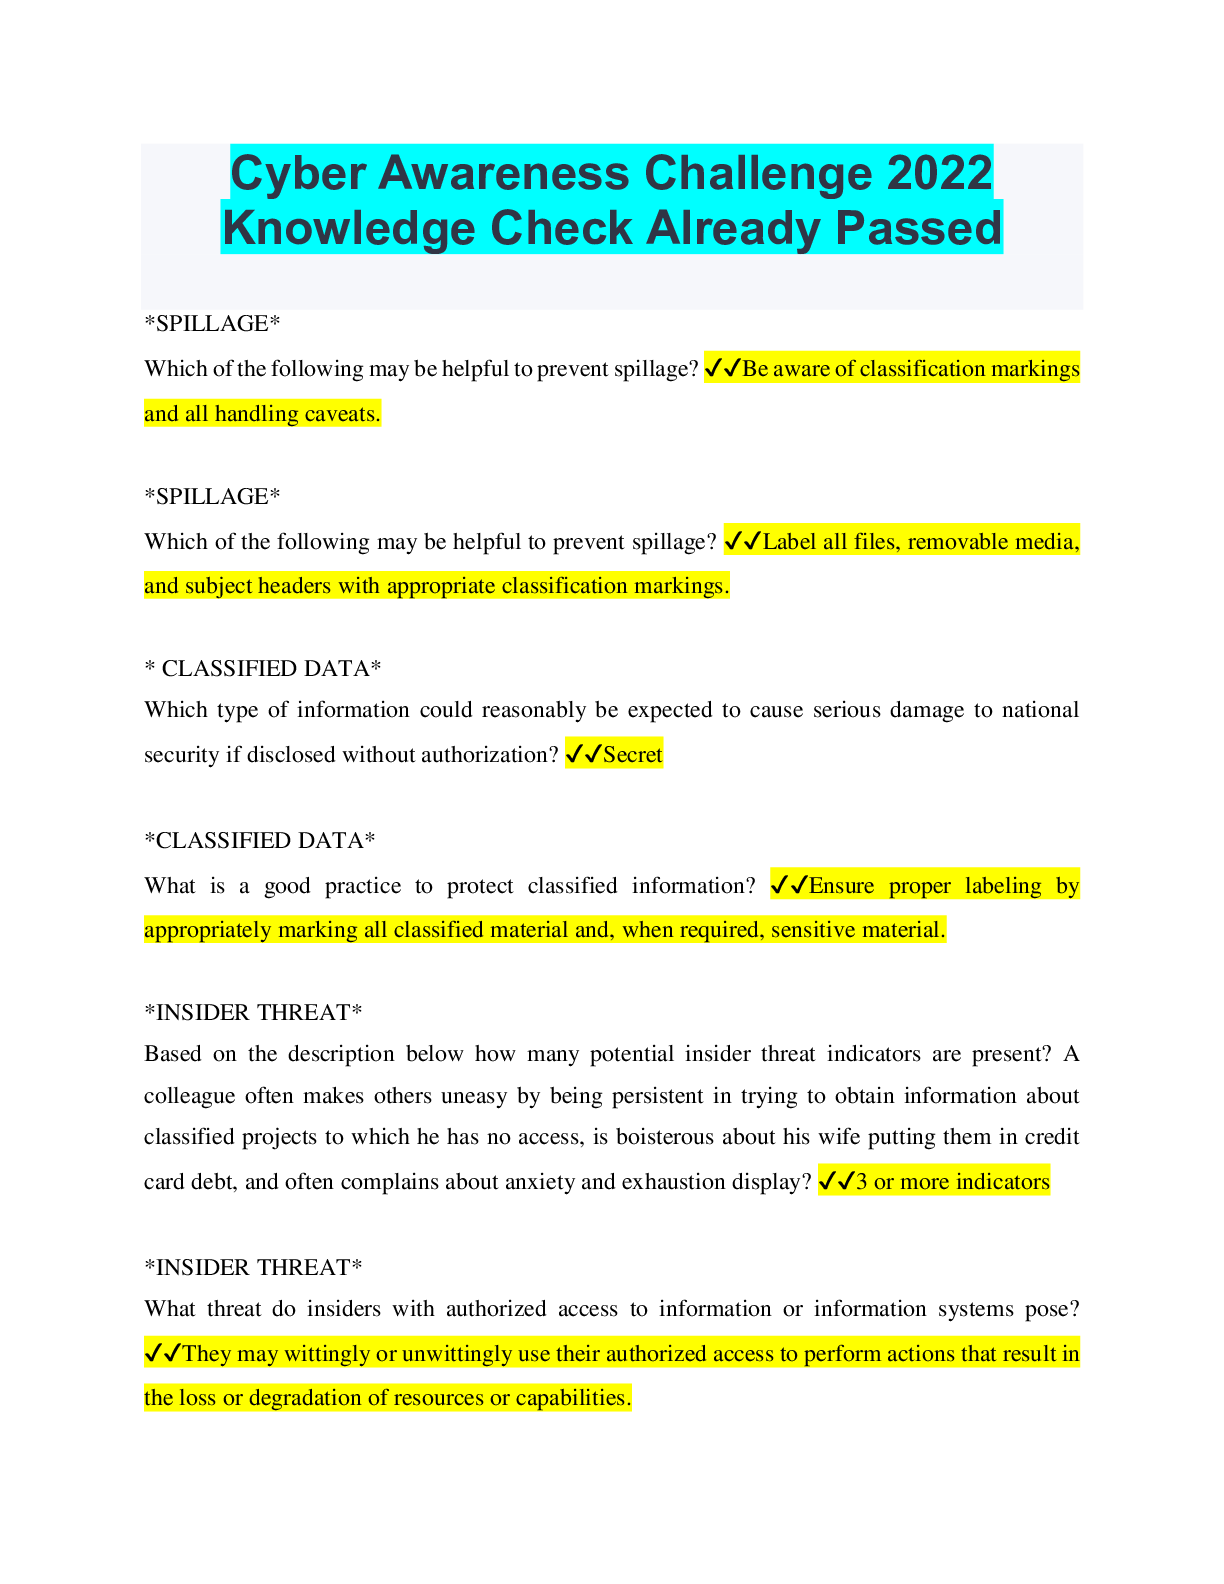 Cyber Awareness Challenge 2022 Knowledge Check Already Passed